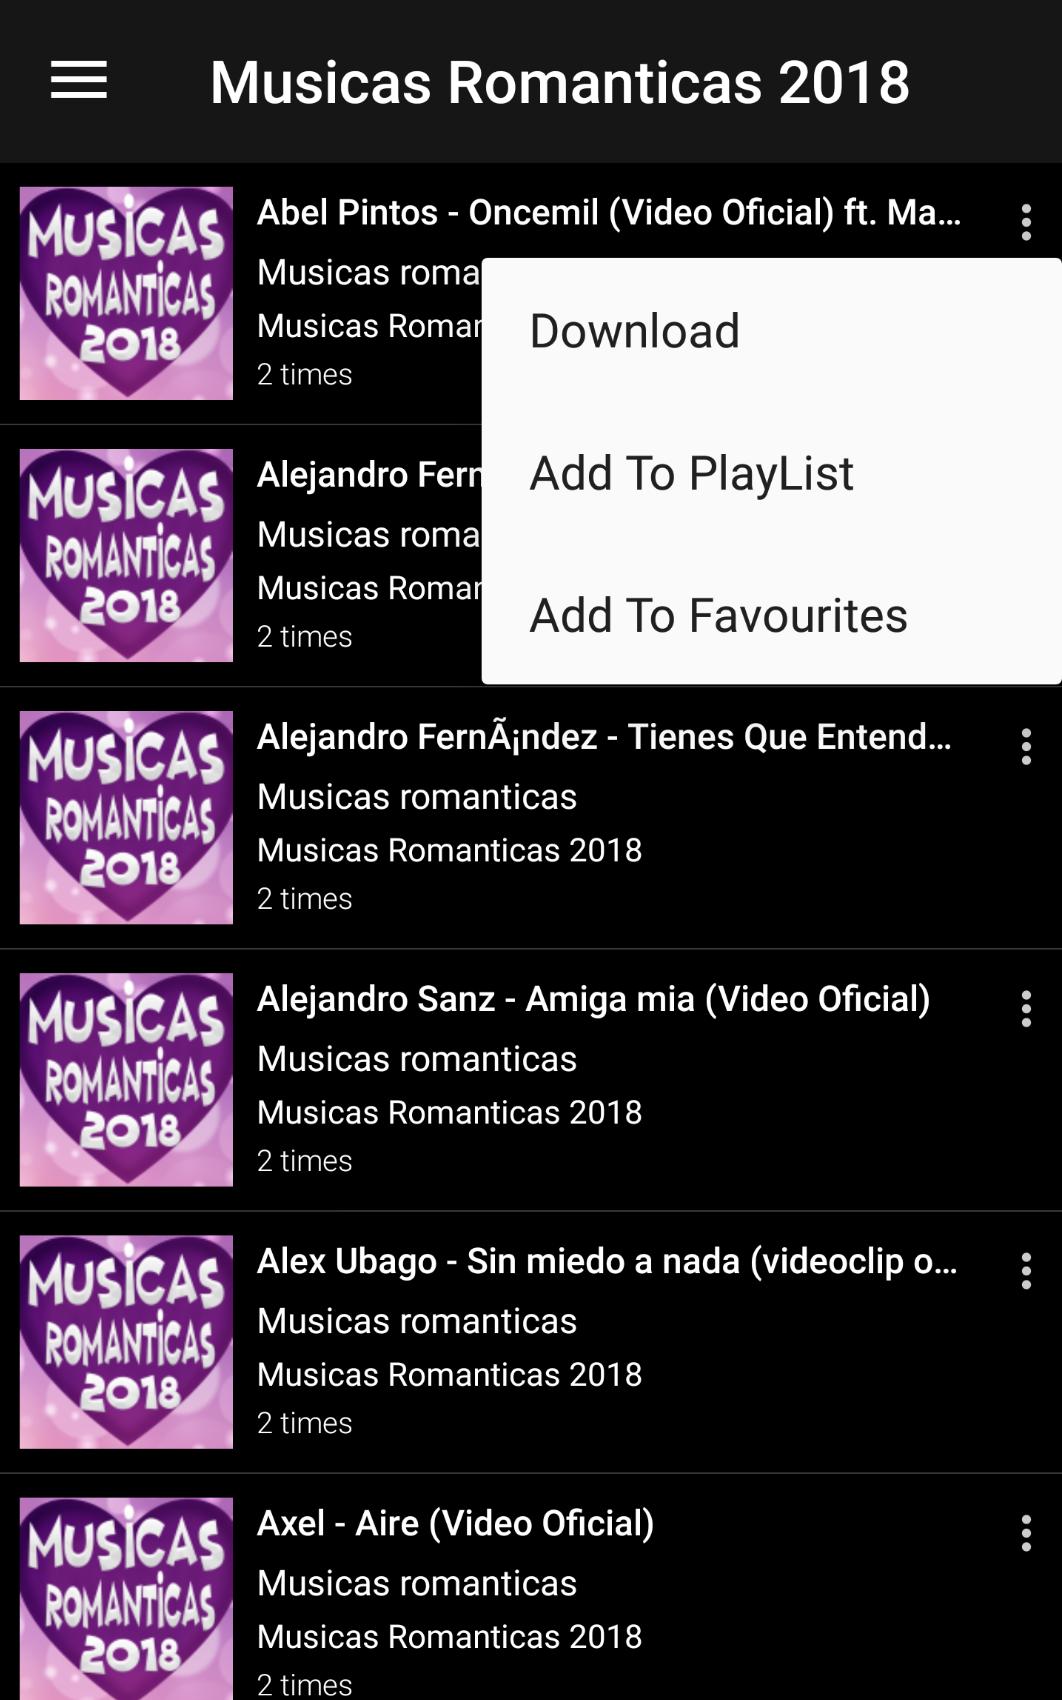 Top Musicas Romanticas 2018 for Android - APK Download